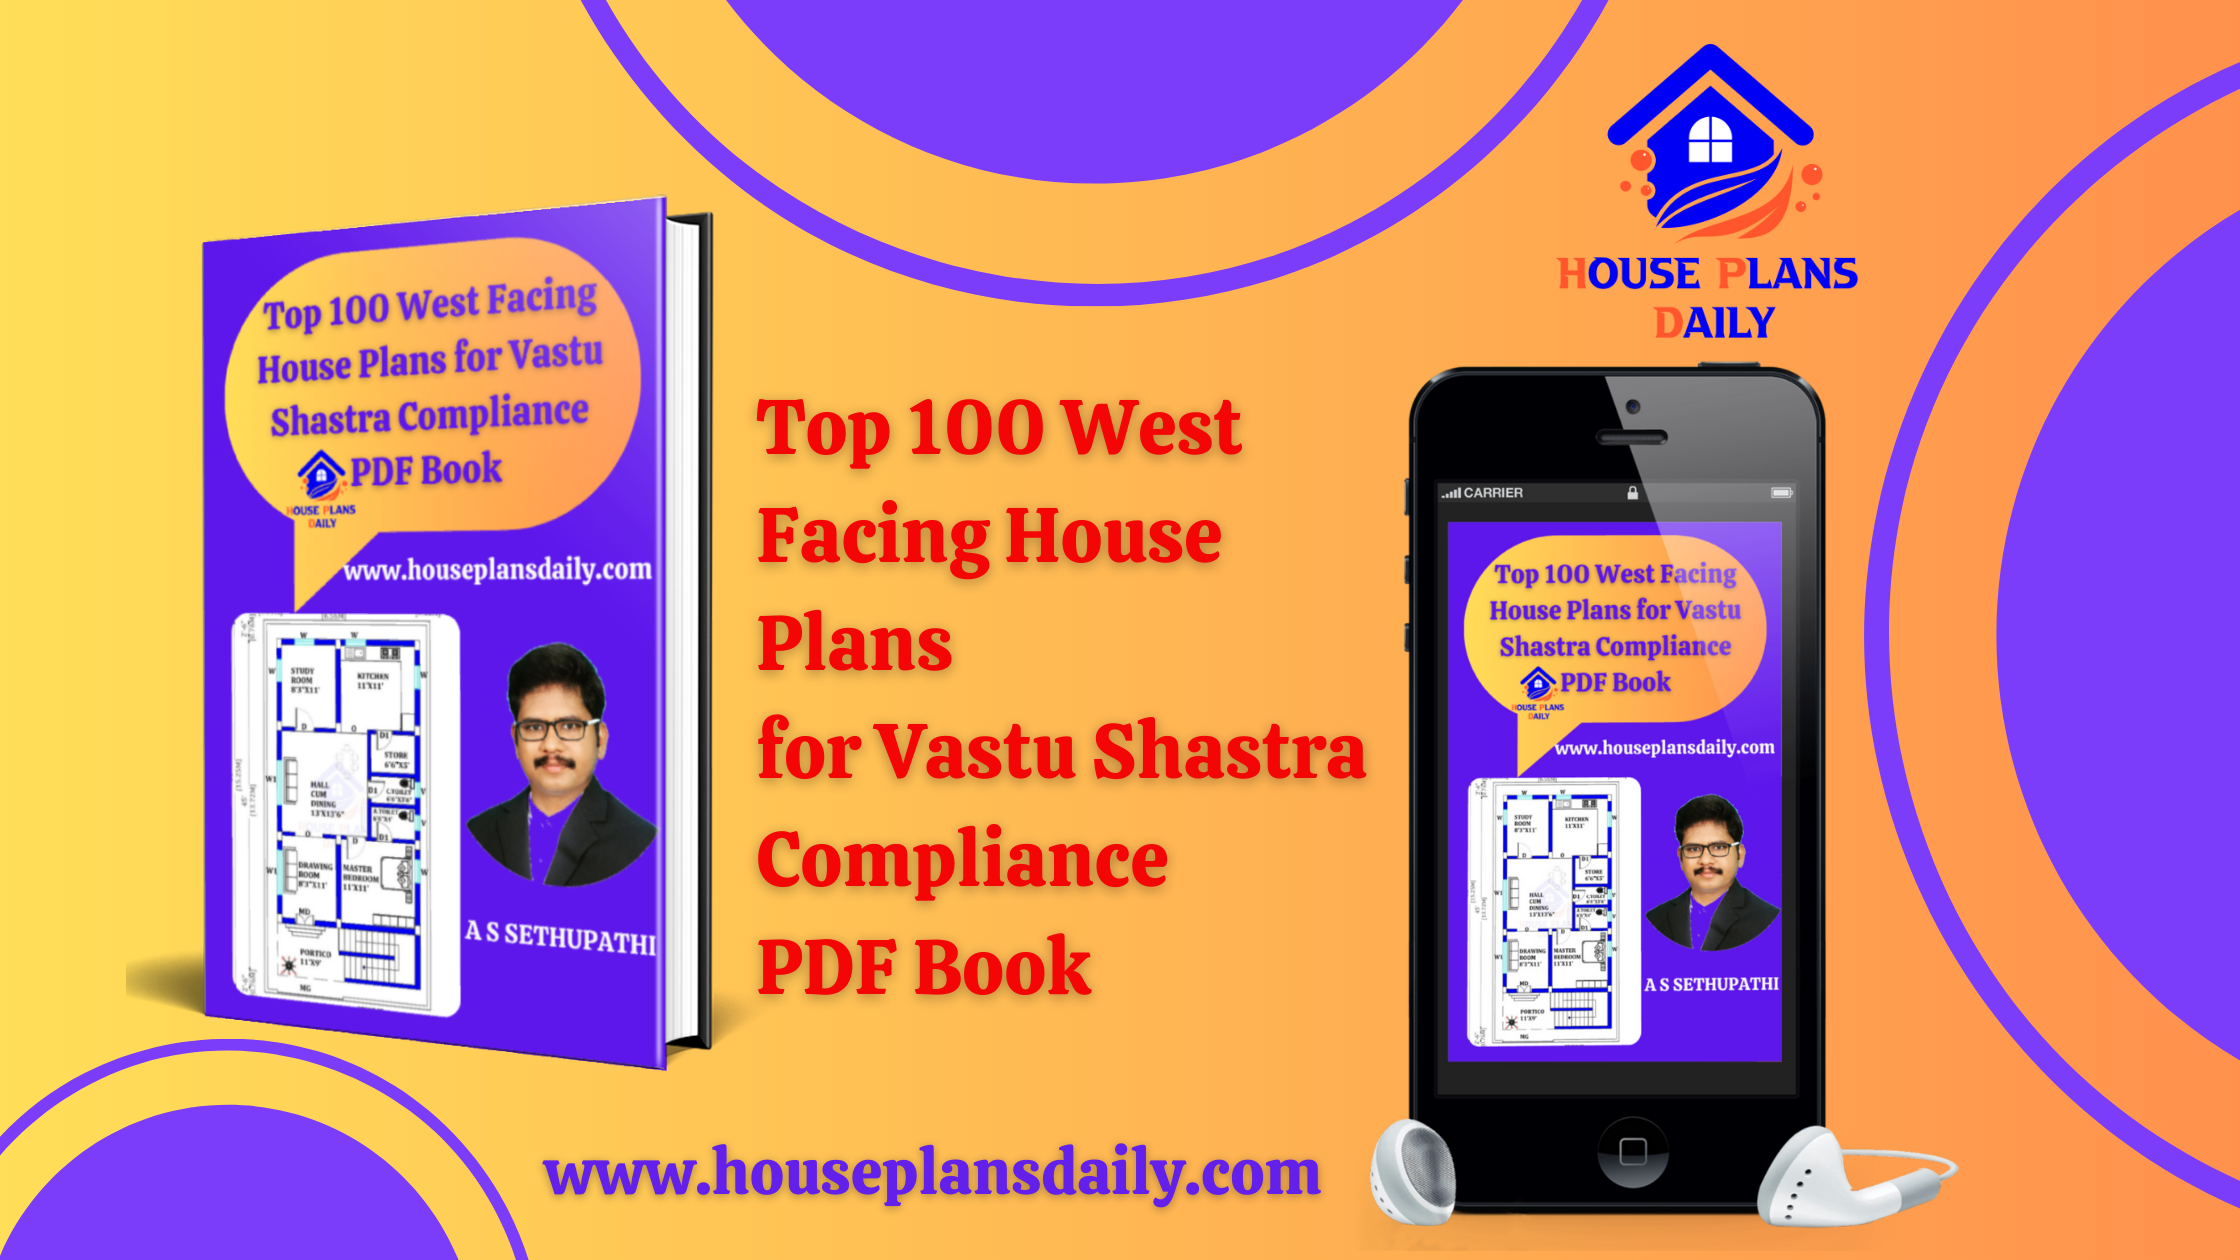 Top 100 West Facing House Plans for Vastu Shastra Compliance PDF Book